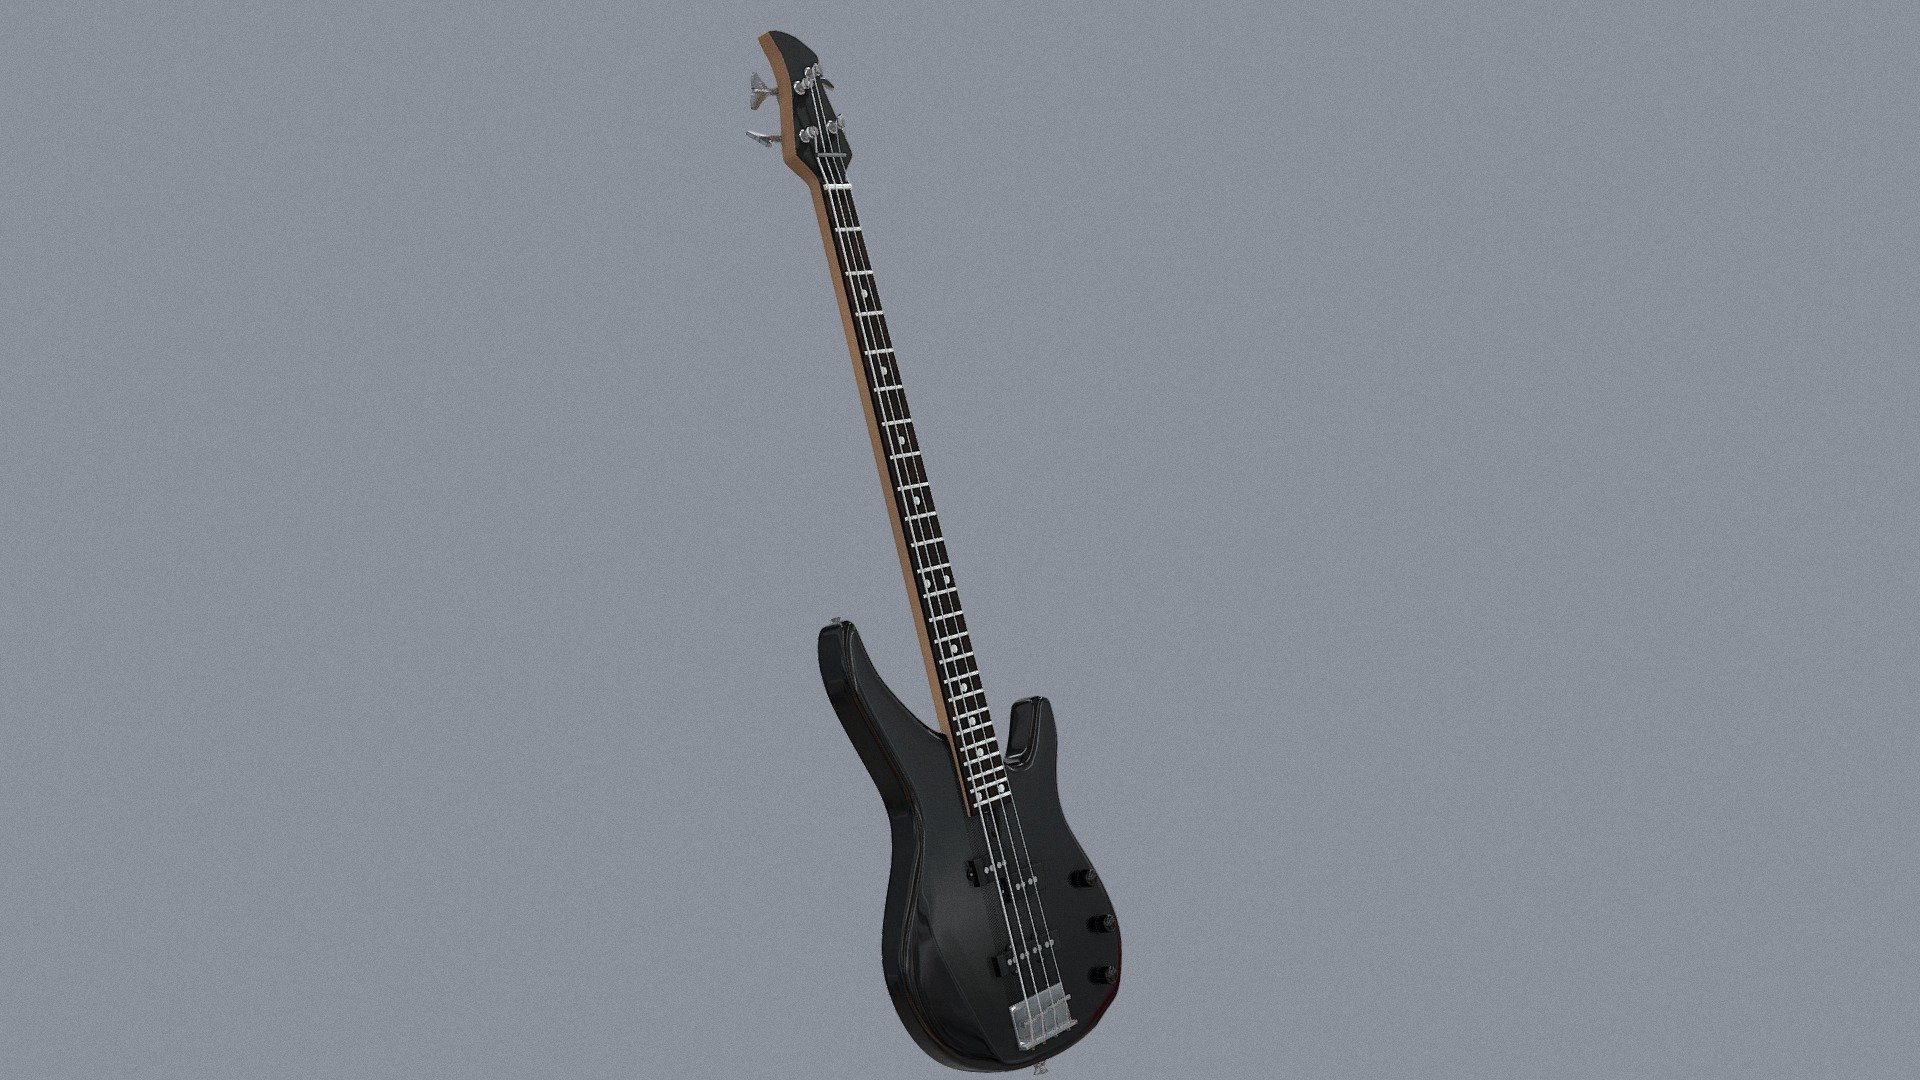 Fairly detailed model of a bass guitar. I based it the one I own, Yamaha TRBX174. Wood and string textures were made in Blender 3d model